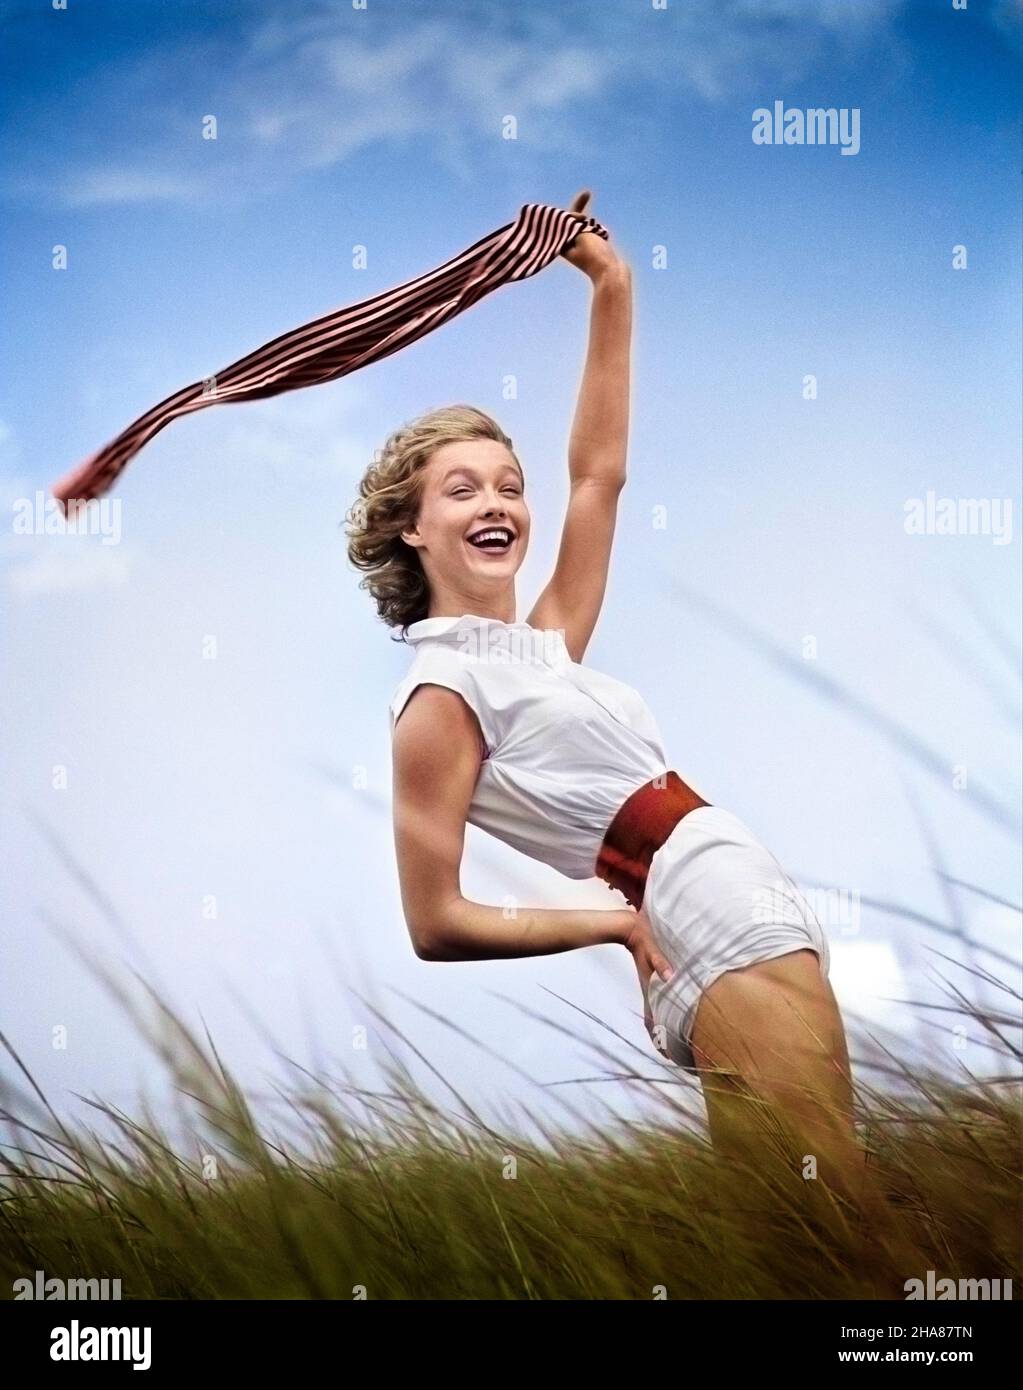 1950s 1960s SMILING YOUNG WOMAN IN WHITE SHORTS AND BLOUSE BENDING BACK WAVING SCARF IN THE WIND STANDING ON GRASSY BEACH DUNE - g5093c HAR001 HARS YOUNG ADULT PLEASED JOY LIFESTYLE SATISFACTION FEMALES GROWNUP HEALTHINESS COPY SPACE HALF-LENGTH LADIES PHYSICAL FITNESS PERSONS GROWN-UP CONFIDENCE SUMMERTIME FRESH SHORE BENDING HAPPINESS CHEERFUL ADVENTURE LEISURE SUMMER SEASON BREEZE DUNES EXCITEMENT RECREATION SQUINTING INTO UP BEACHES BLOUSE SMILES MOTION BLUR GRASSY JOYFUL SANDY STYLISH WINDY BREEZY RELAXATION SAND DUNE SEASON YOUNG ADULT WOMAN CAUCASIAN ETHNICITY HAR001 OLD FASHIONED Stock Photo